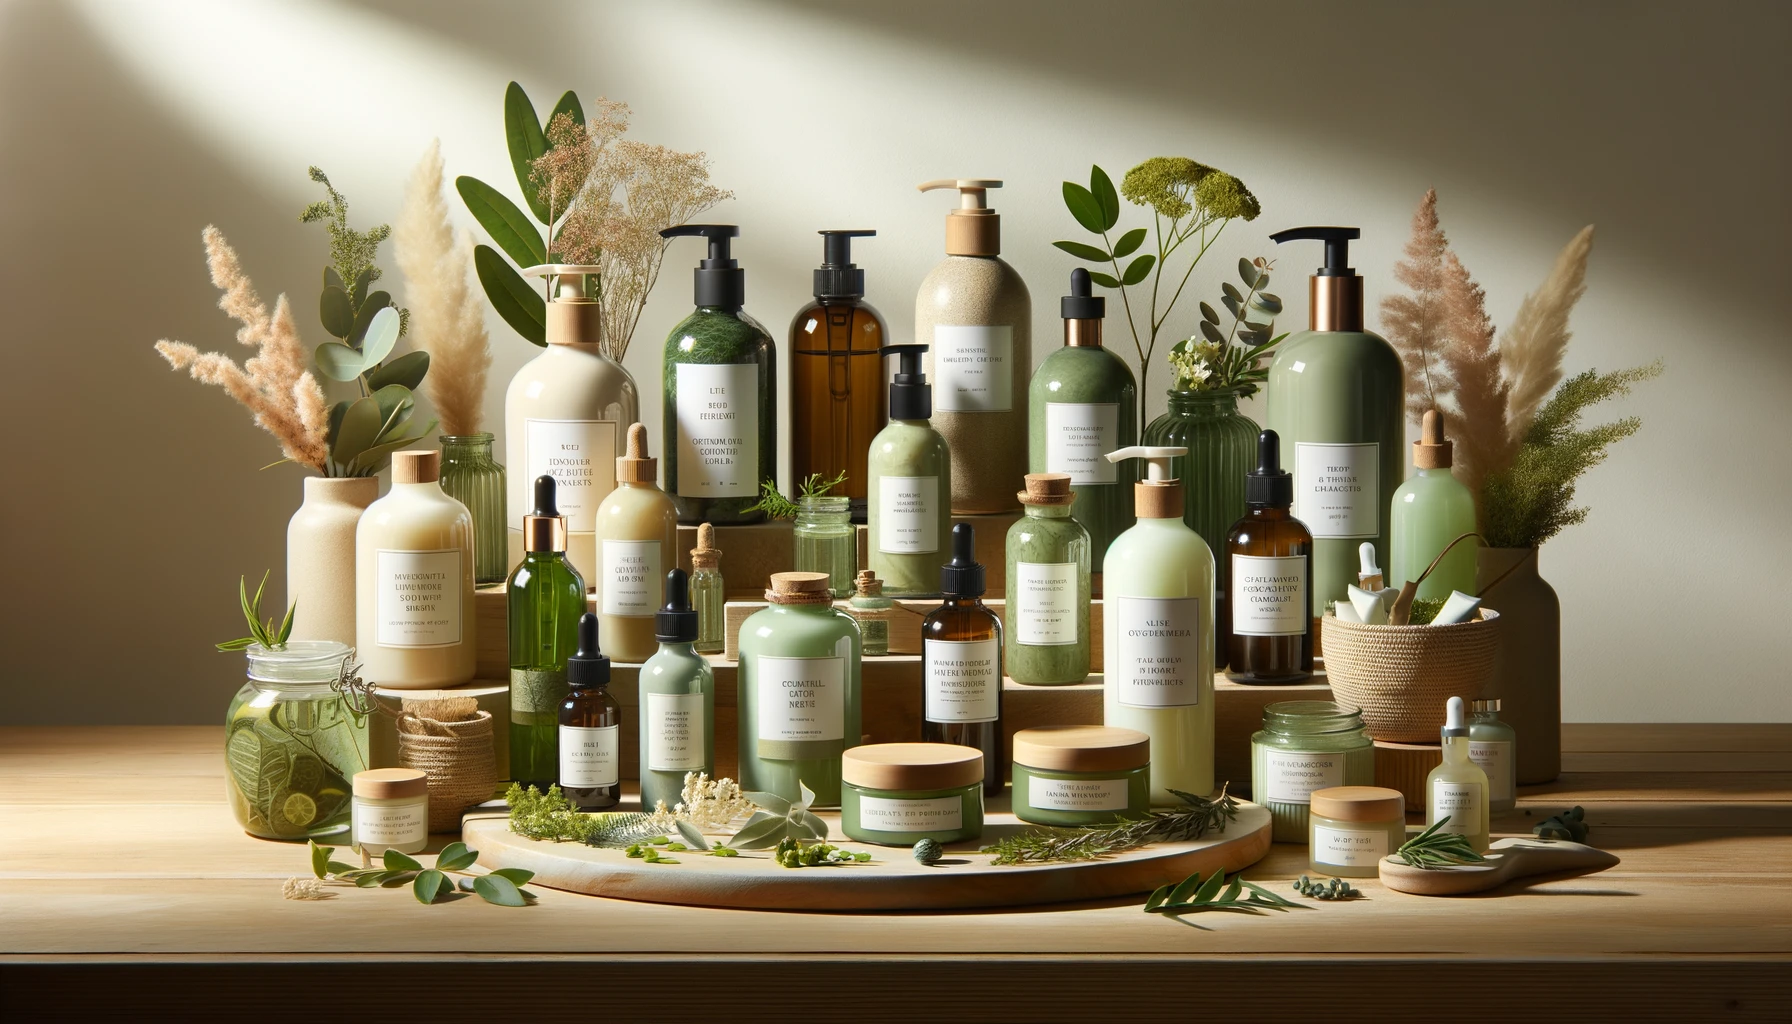 Top 10 natural and organic beauty products of 2023 elegantly displayed on a wooden surface, with eco-friendly packaging and natural ingredients accentuated by soft, ambient lighting.